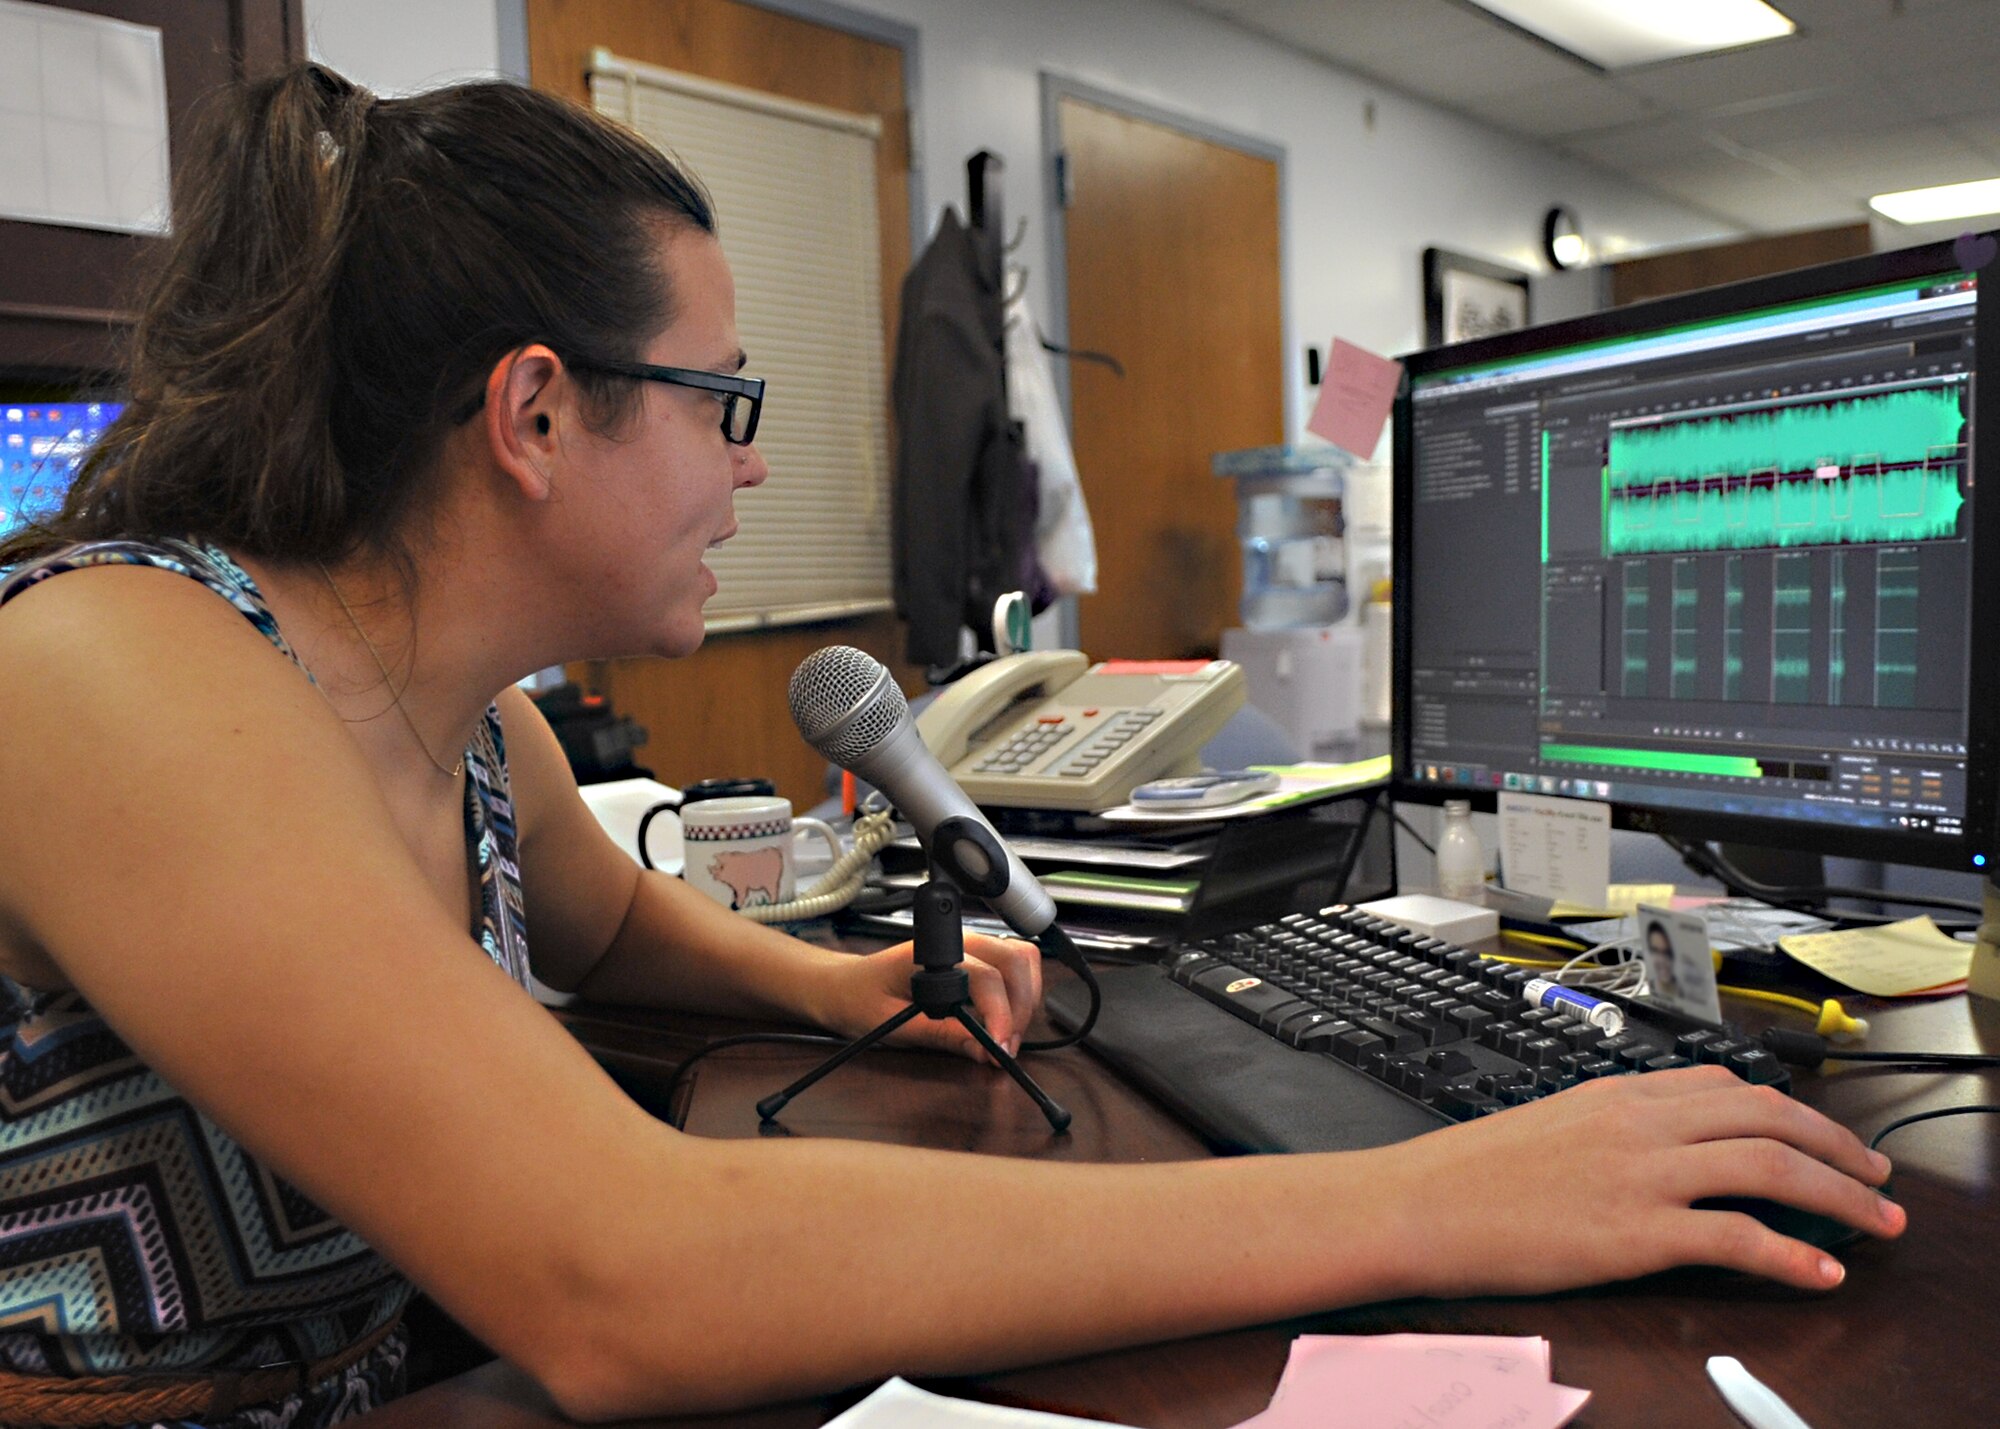 Aliese Halcomb, 325th Force Support Squadron graphic illustrator, operates audio editing software to incorporate music and advertisement recordings into their on-hold systems Oct. 28 in the marketing office at Military Personnel Section building. This system will be used to better inform callers of events being hosted by agencies on the installation. (U.S. Air Force photo by Senior Airman Ty-Rico Lea/Released)